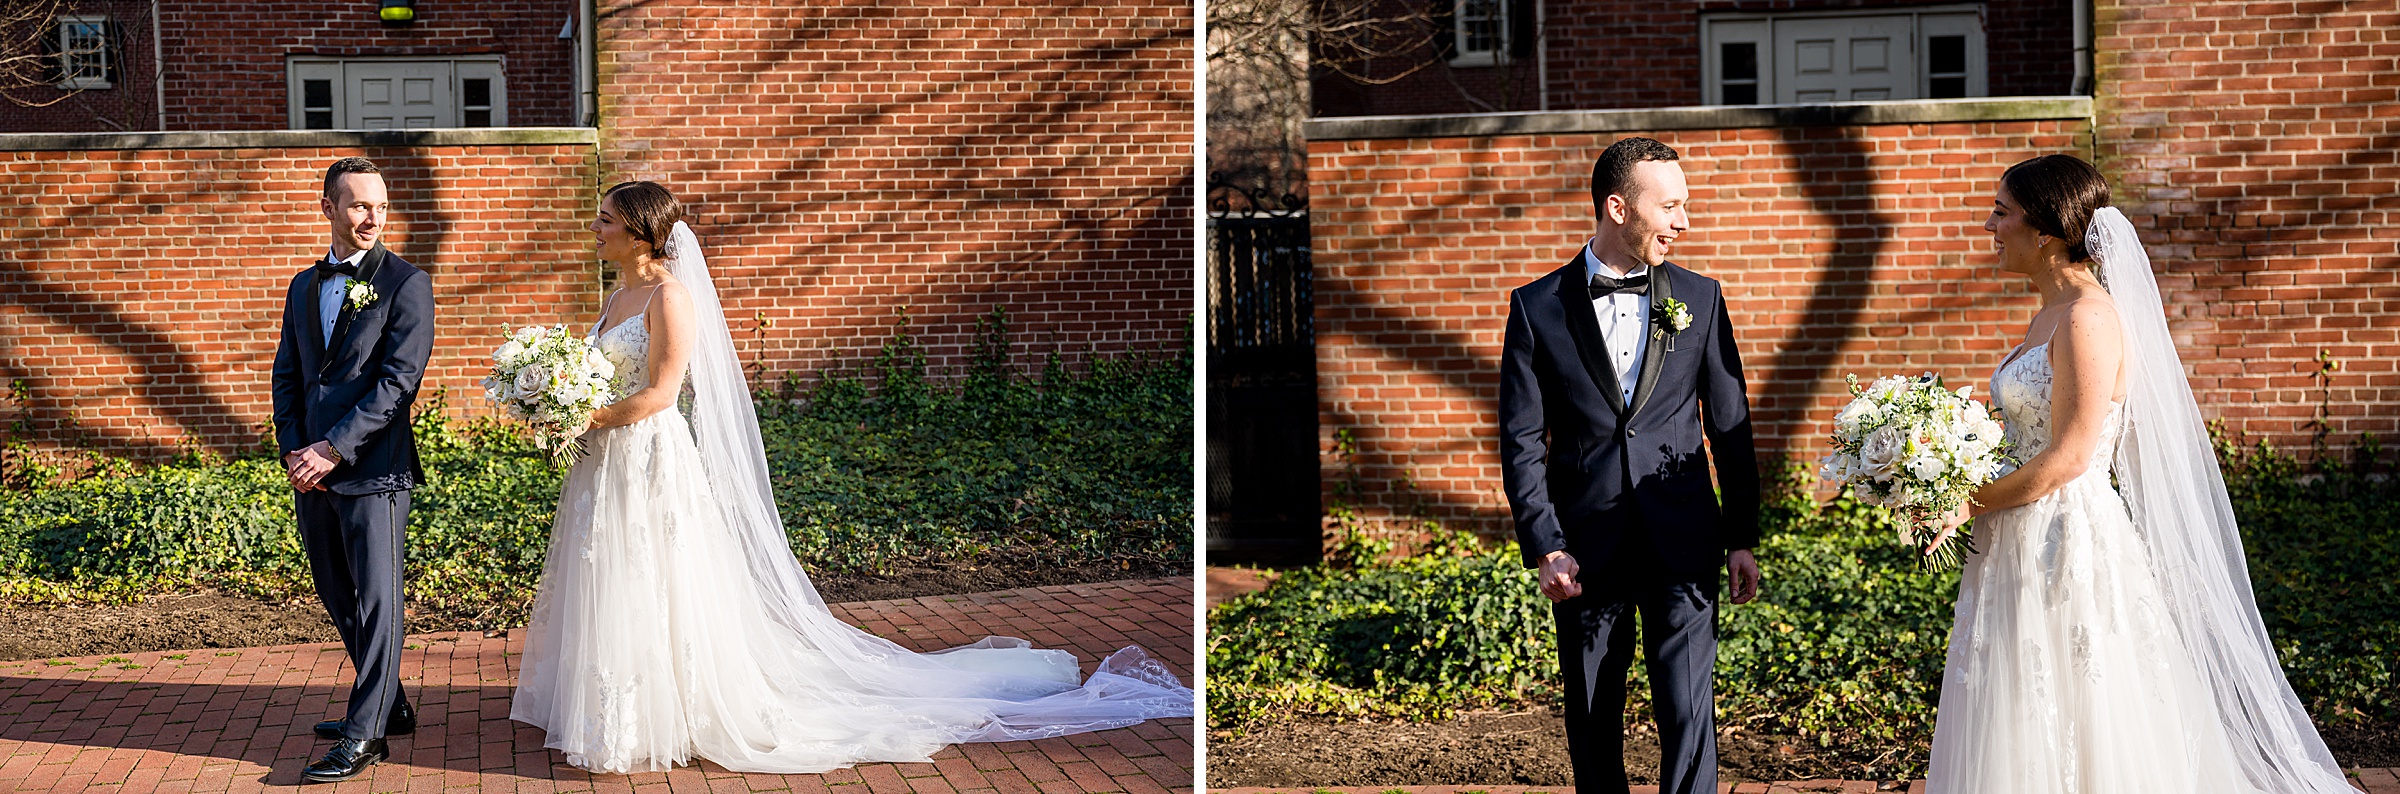 A bride and groom standing in front of a brick building at their Lilah Events wedding.